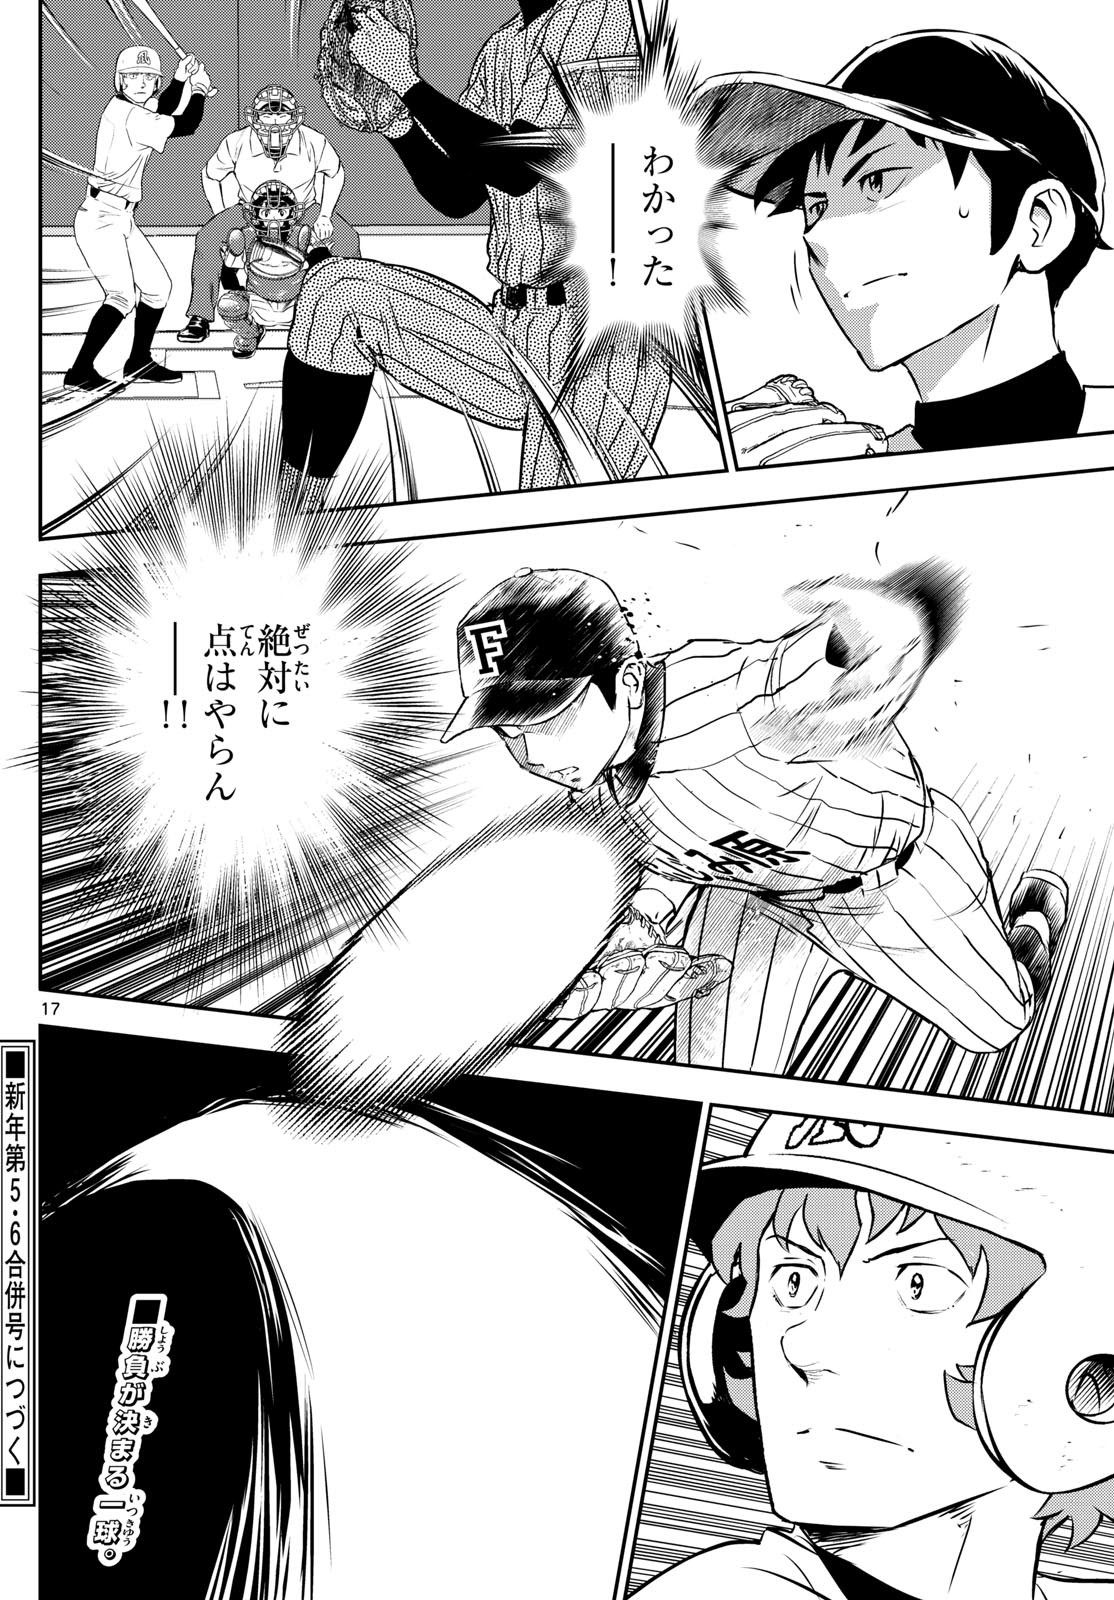 Major 2nd - メジャーセカンド - Chapter 269 - Page 16